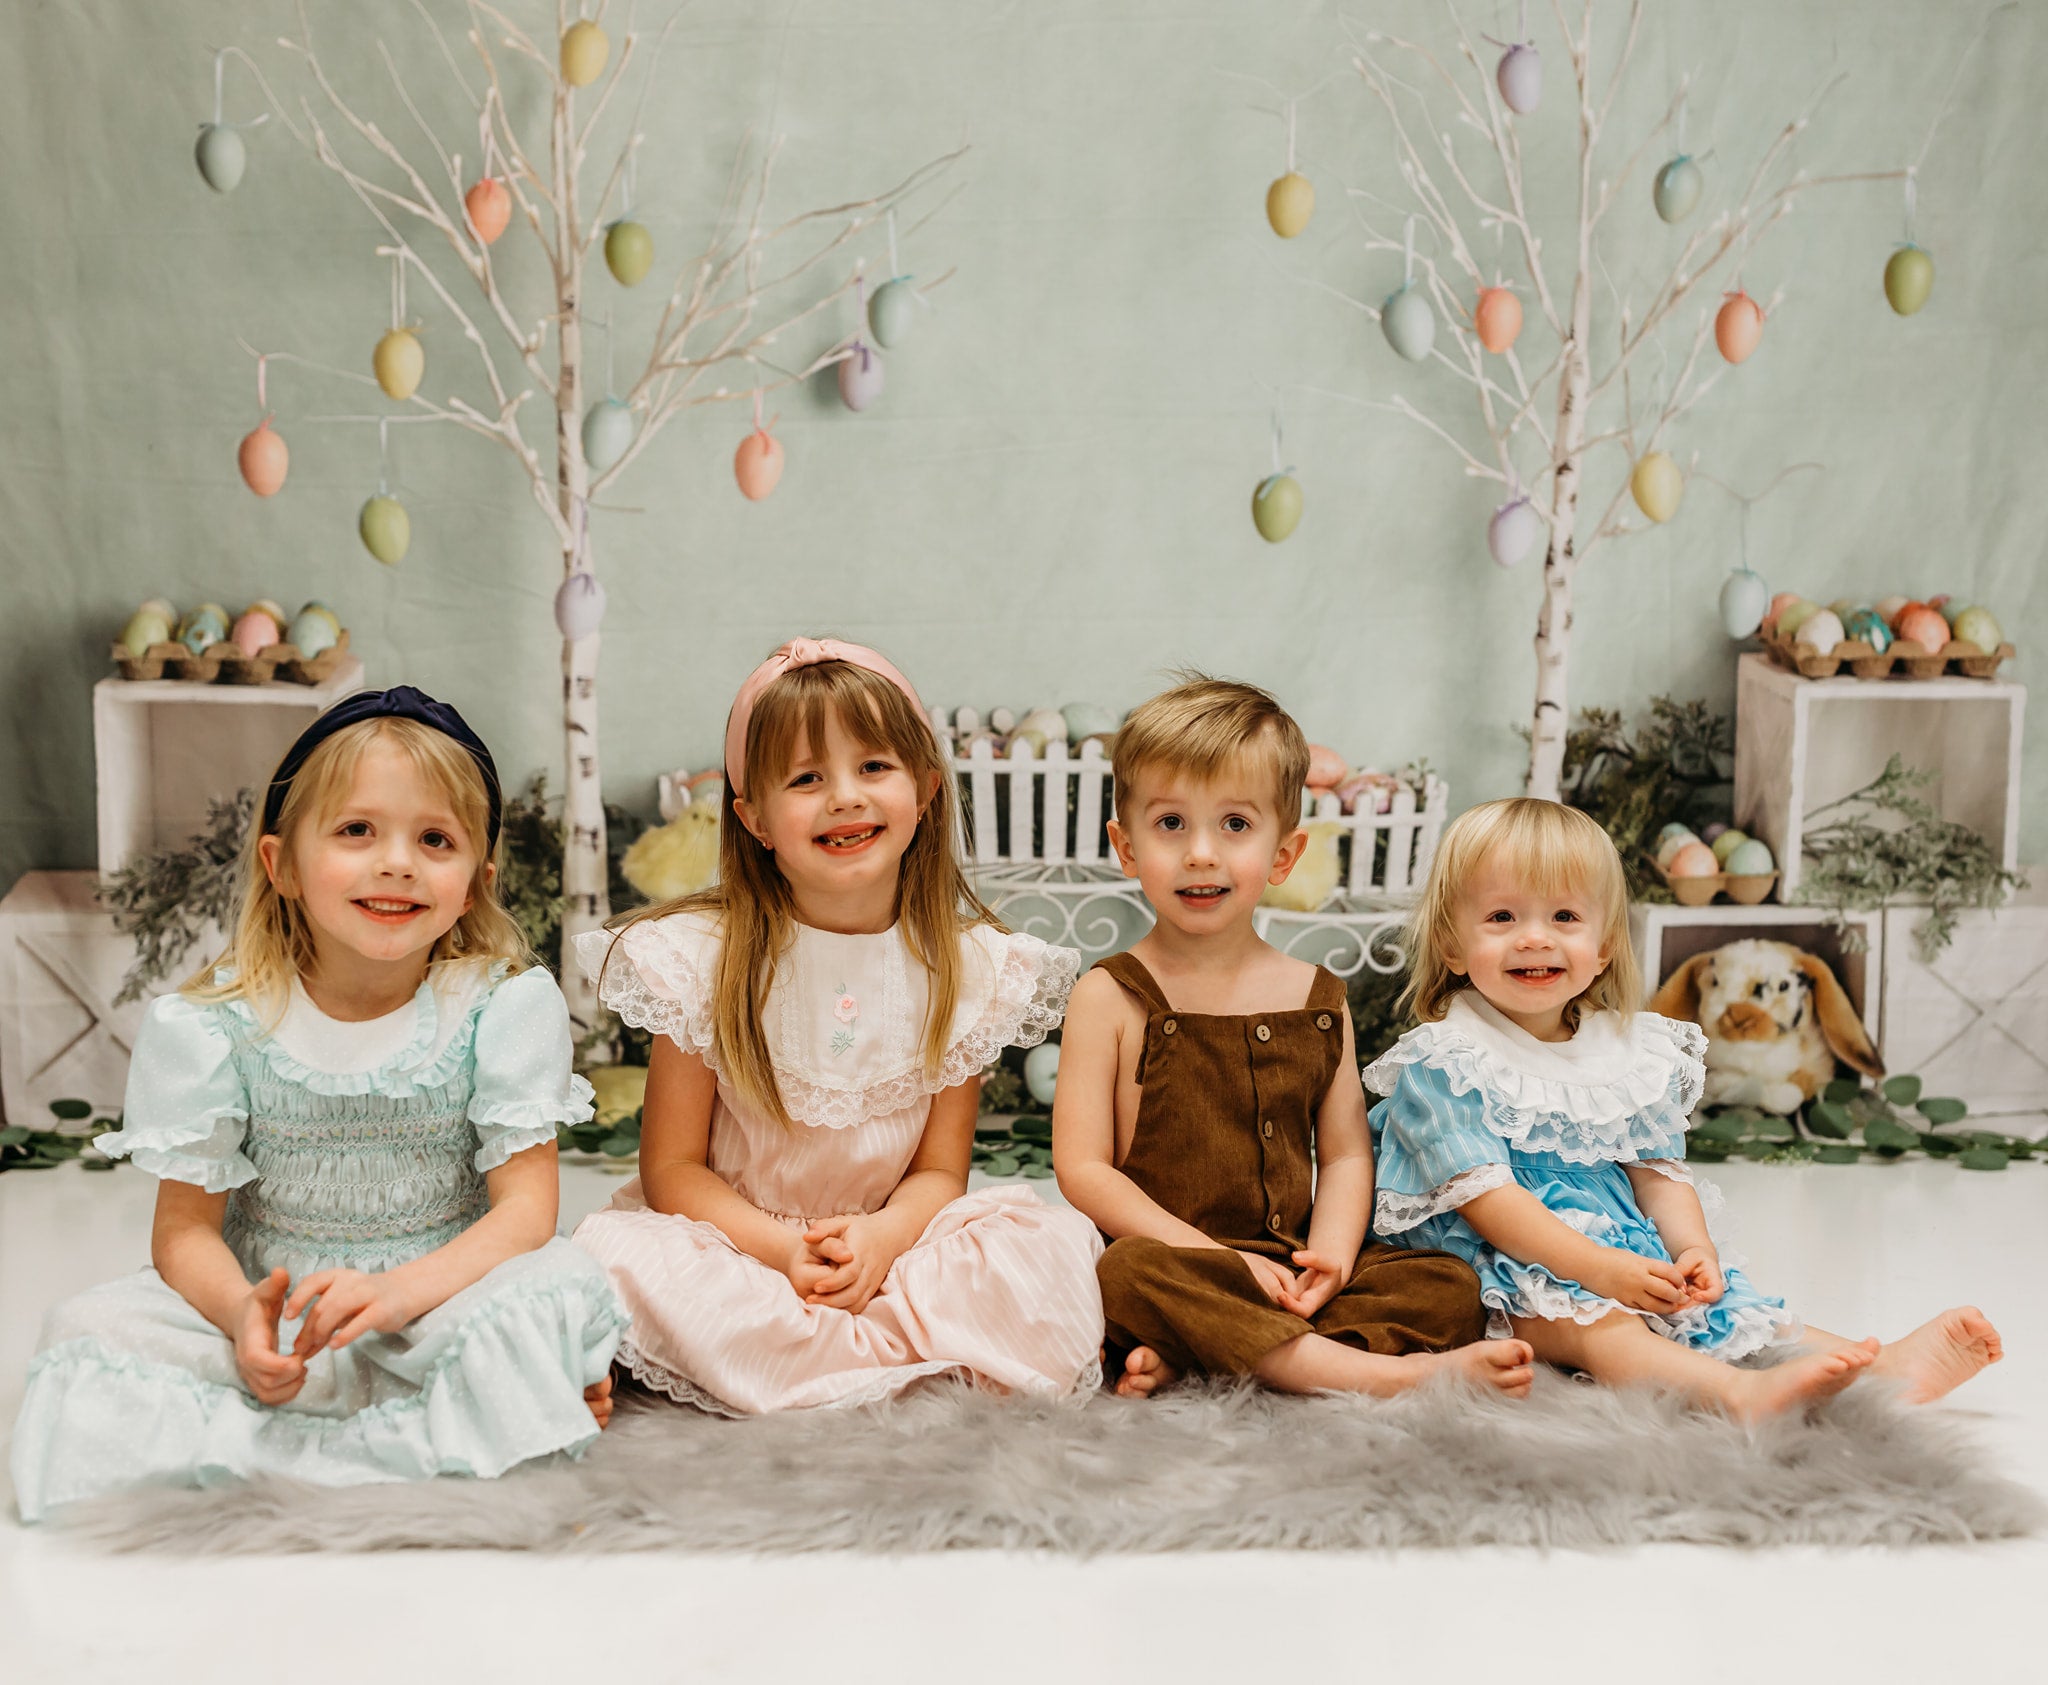 Kate Easter Bunnies and Chicks Backdrop Designed By Mandy Ringe Photography